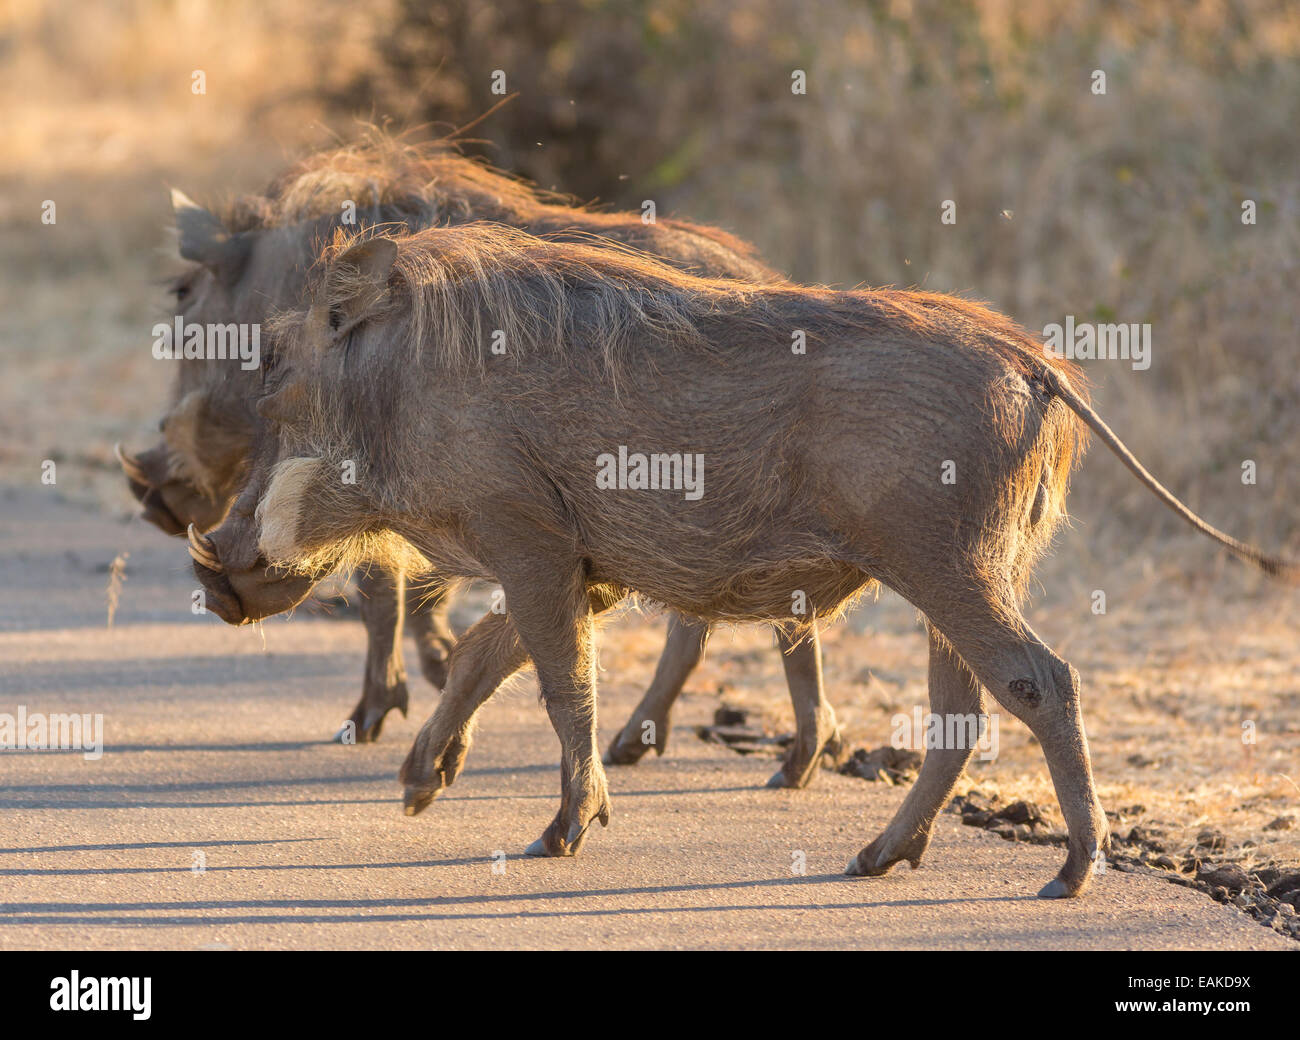 KRUGER NATIONAL PARK, SOUTH AFRICA - Warthogs cross road Stock Photo